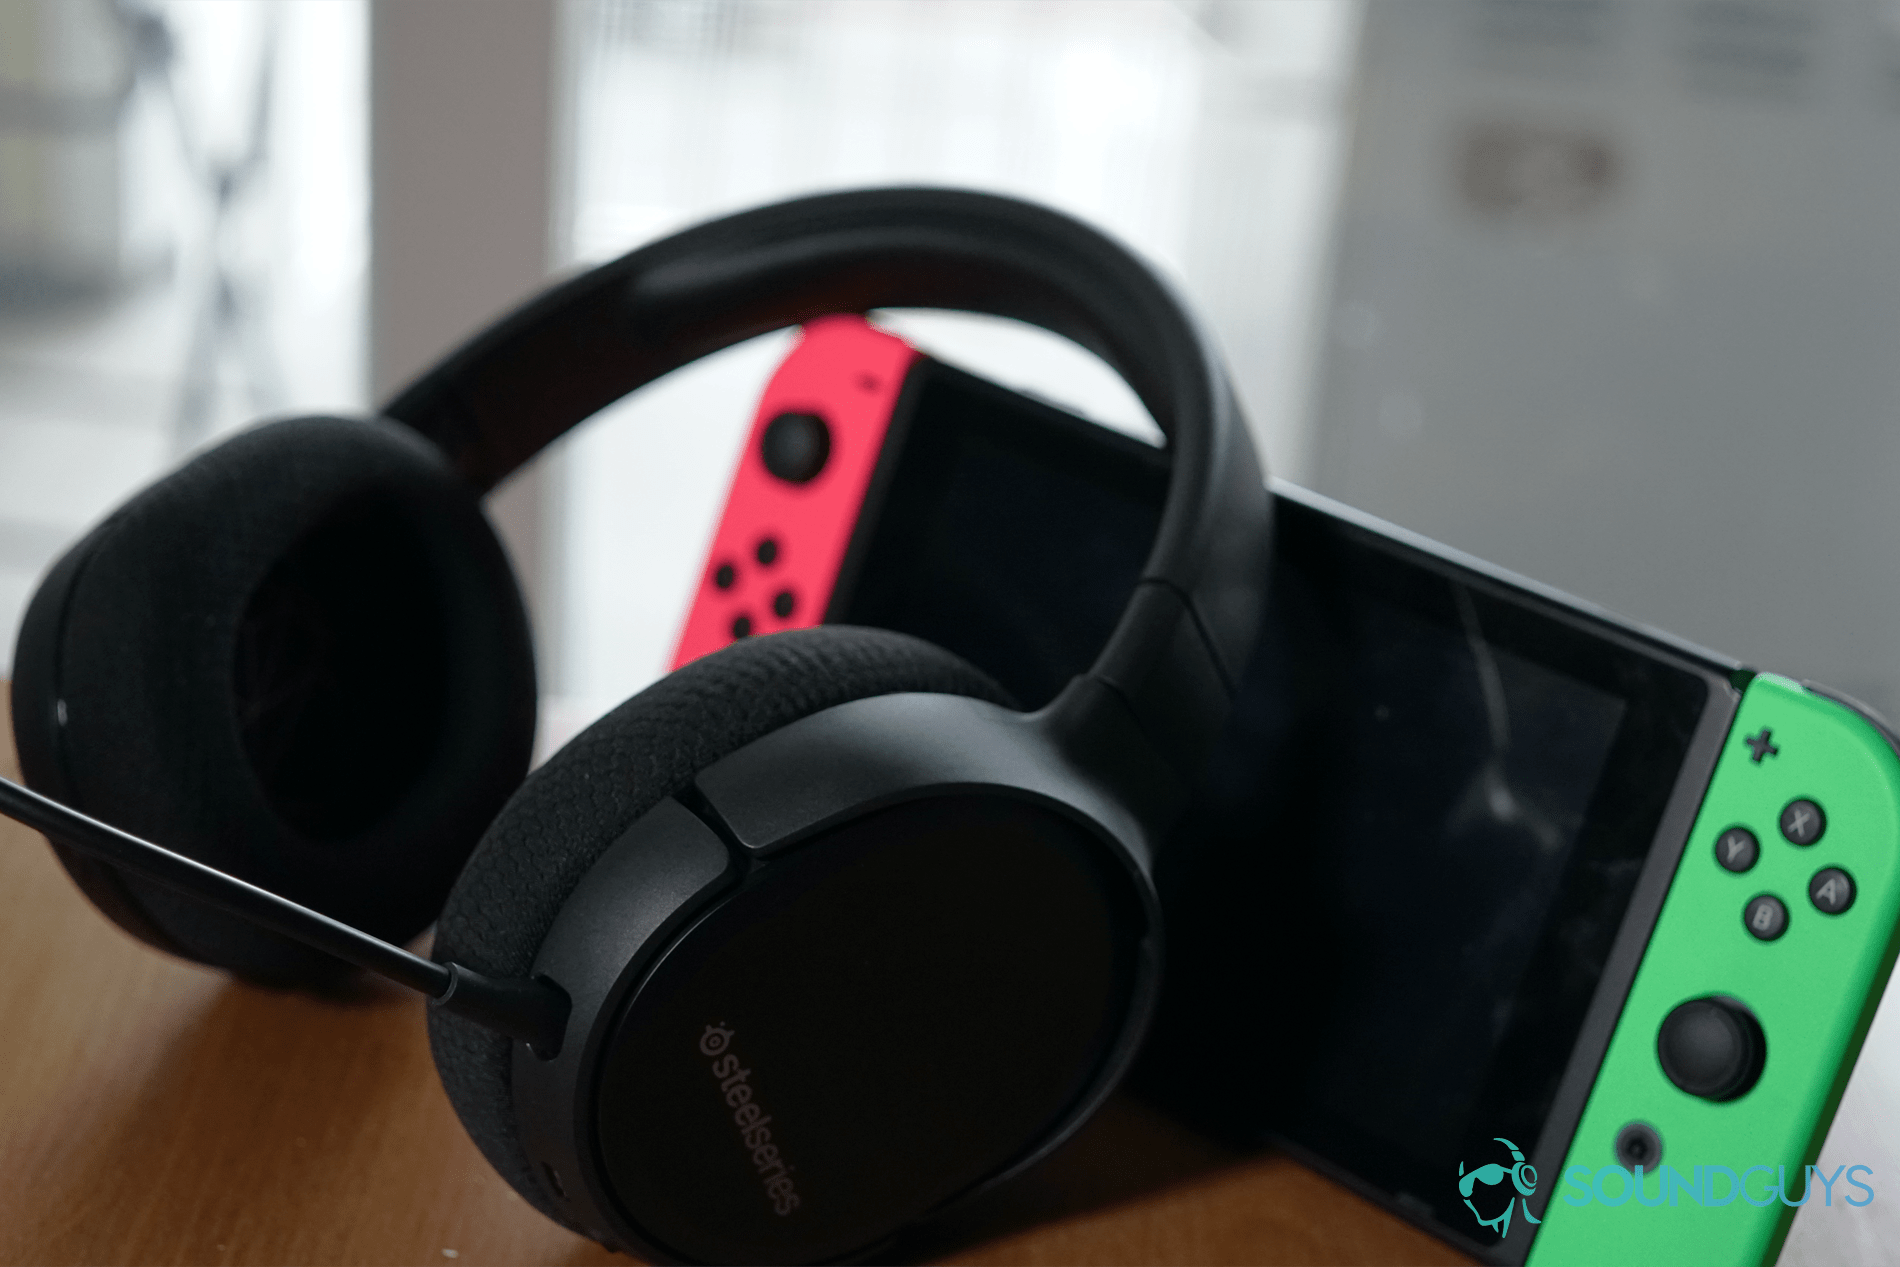 How to connect wireless headphones to any TV - CNET